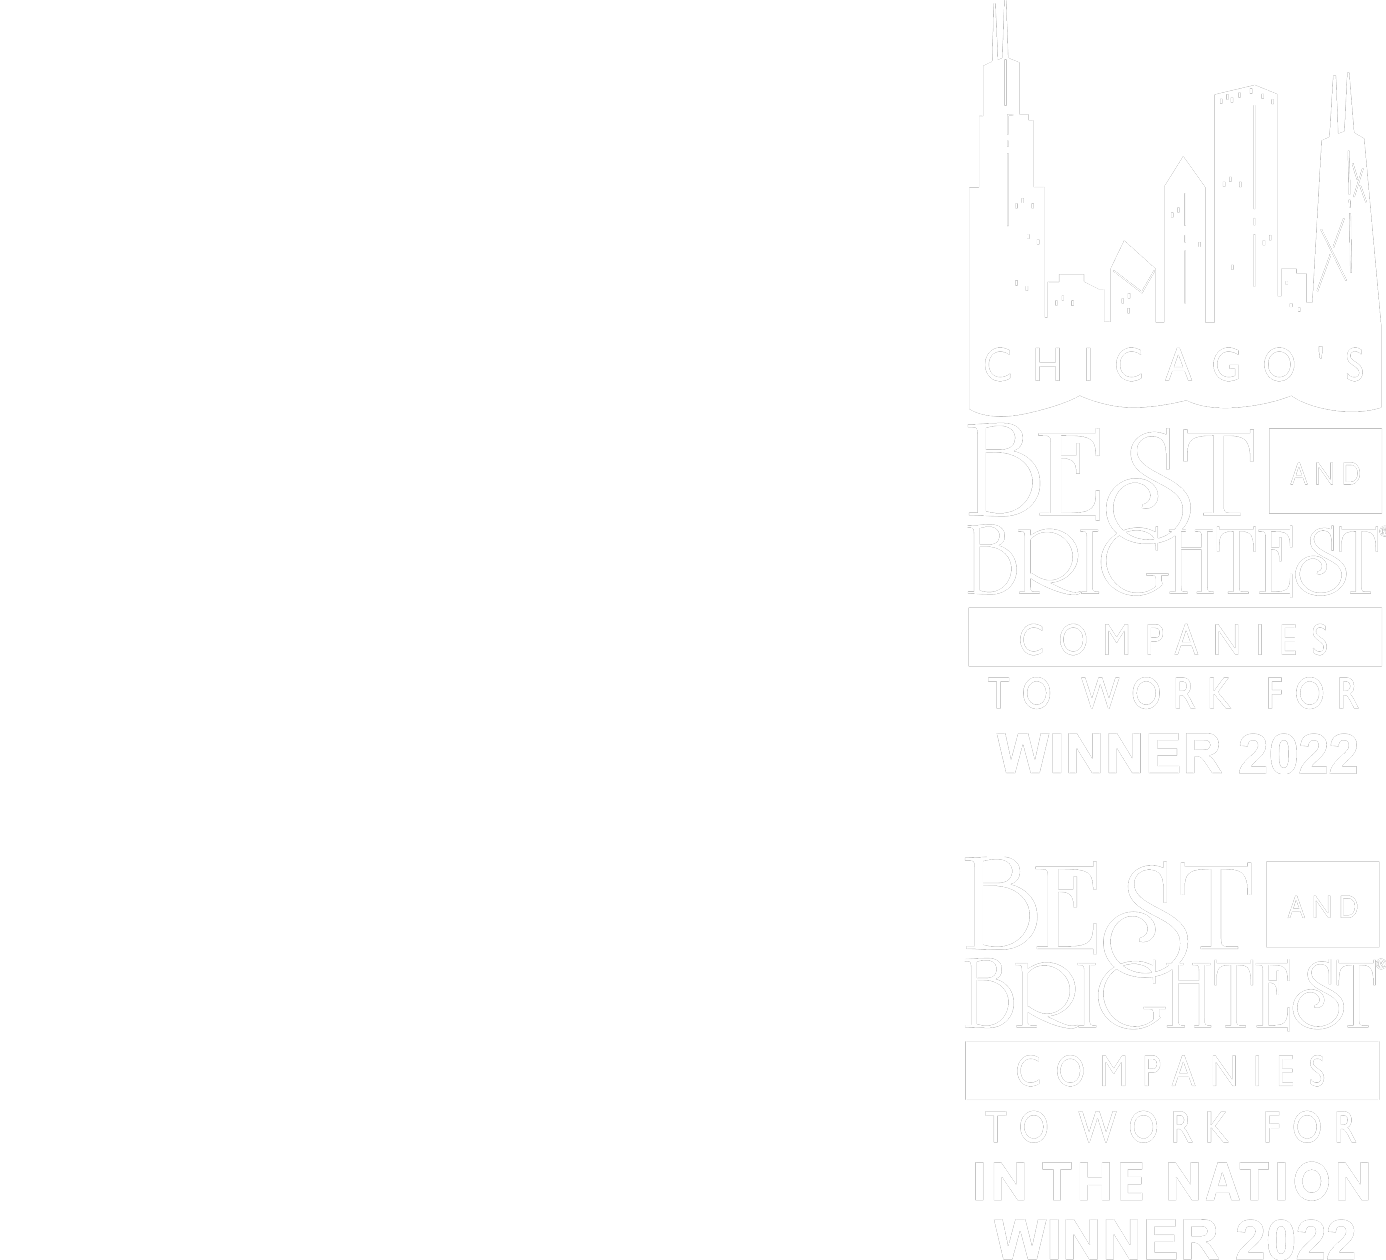 Best & Brightest Winner-National and Chicago: 2022, 2023 & 2024